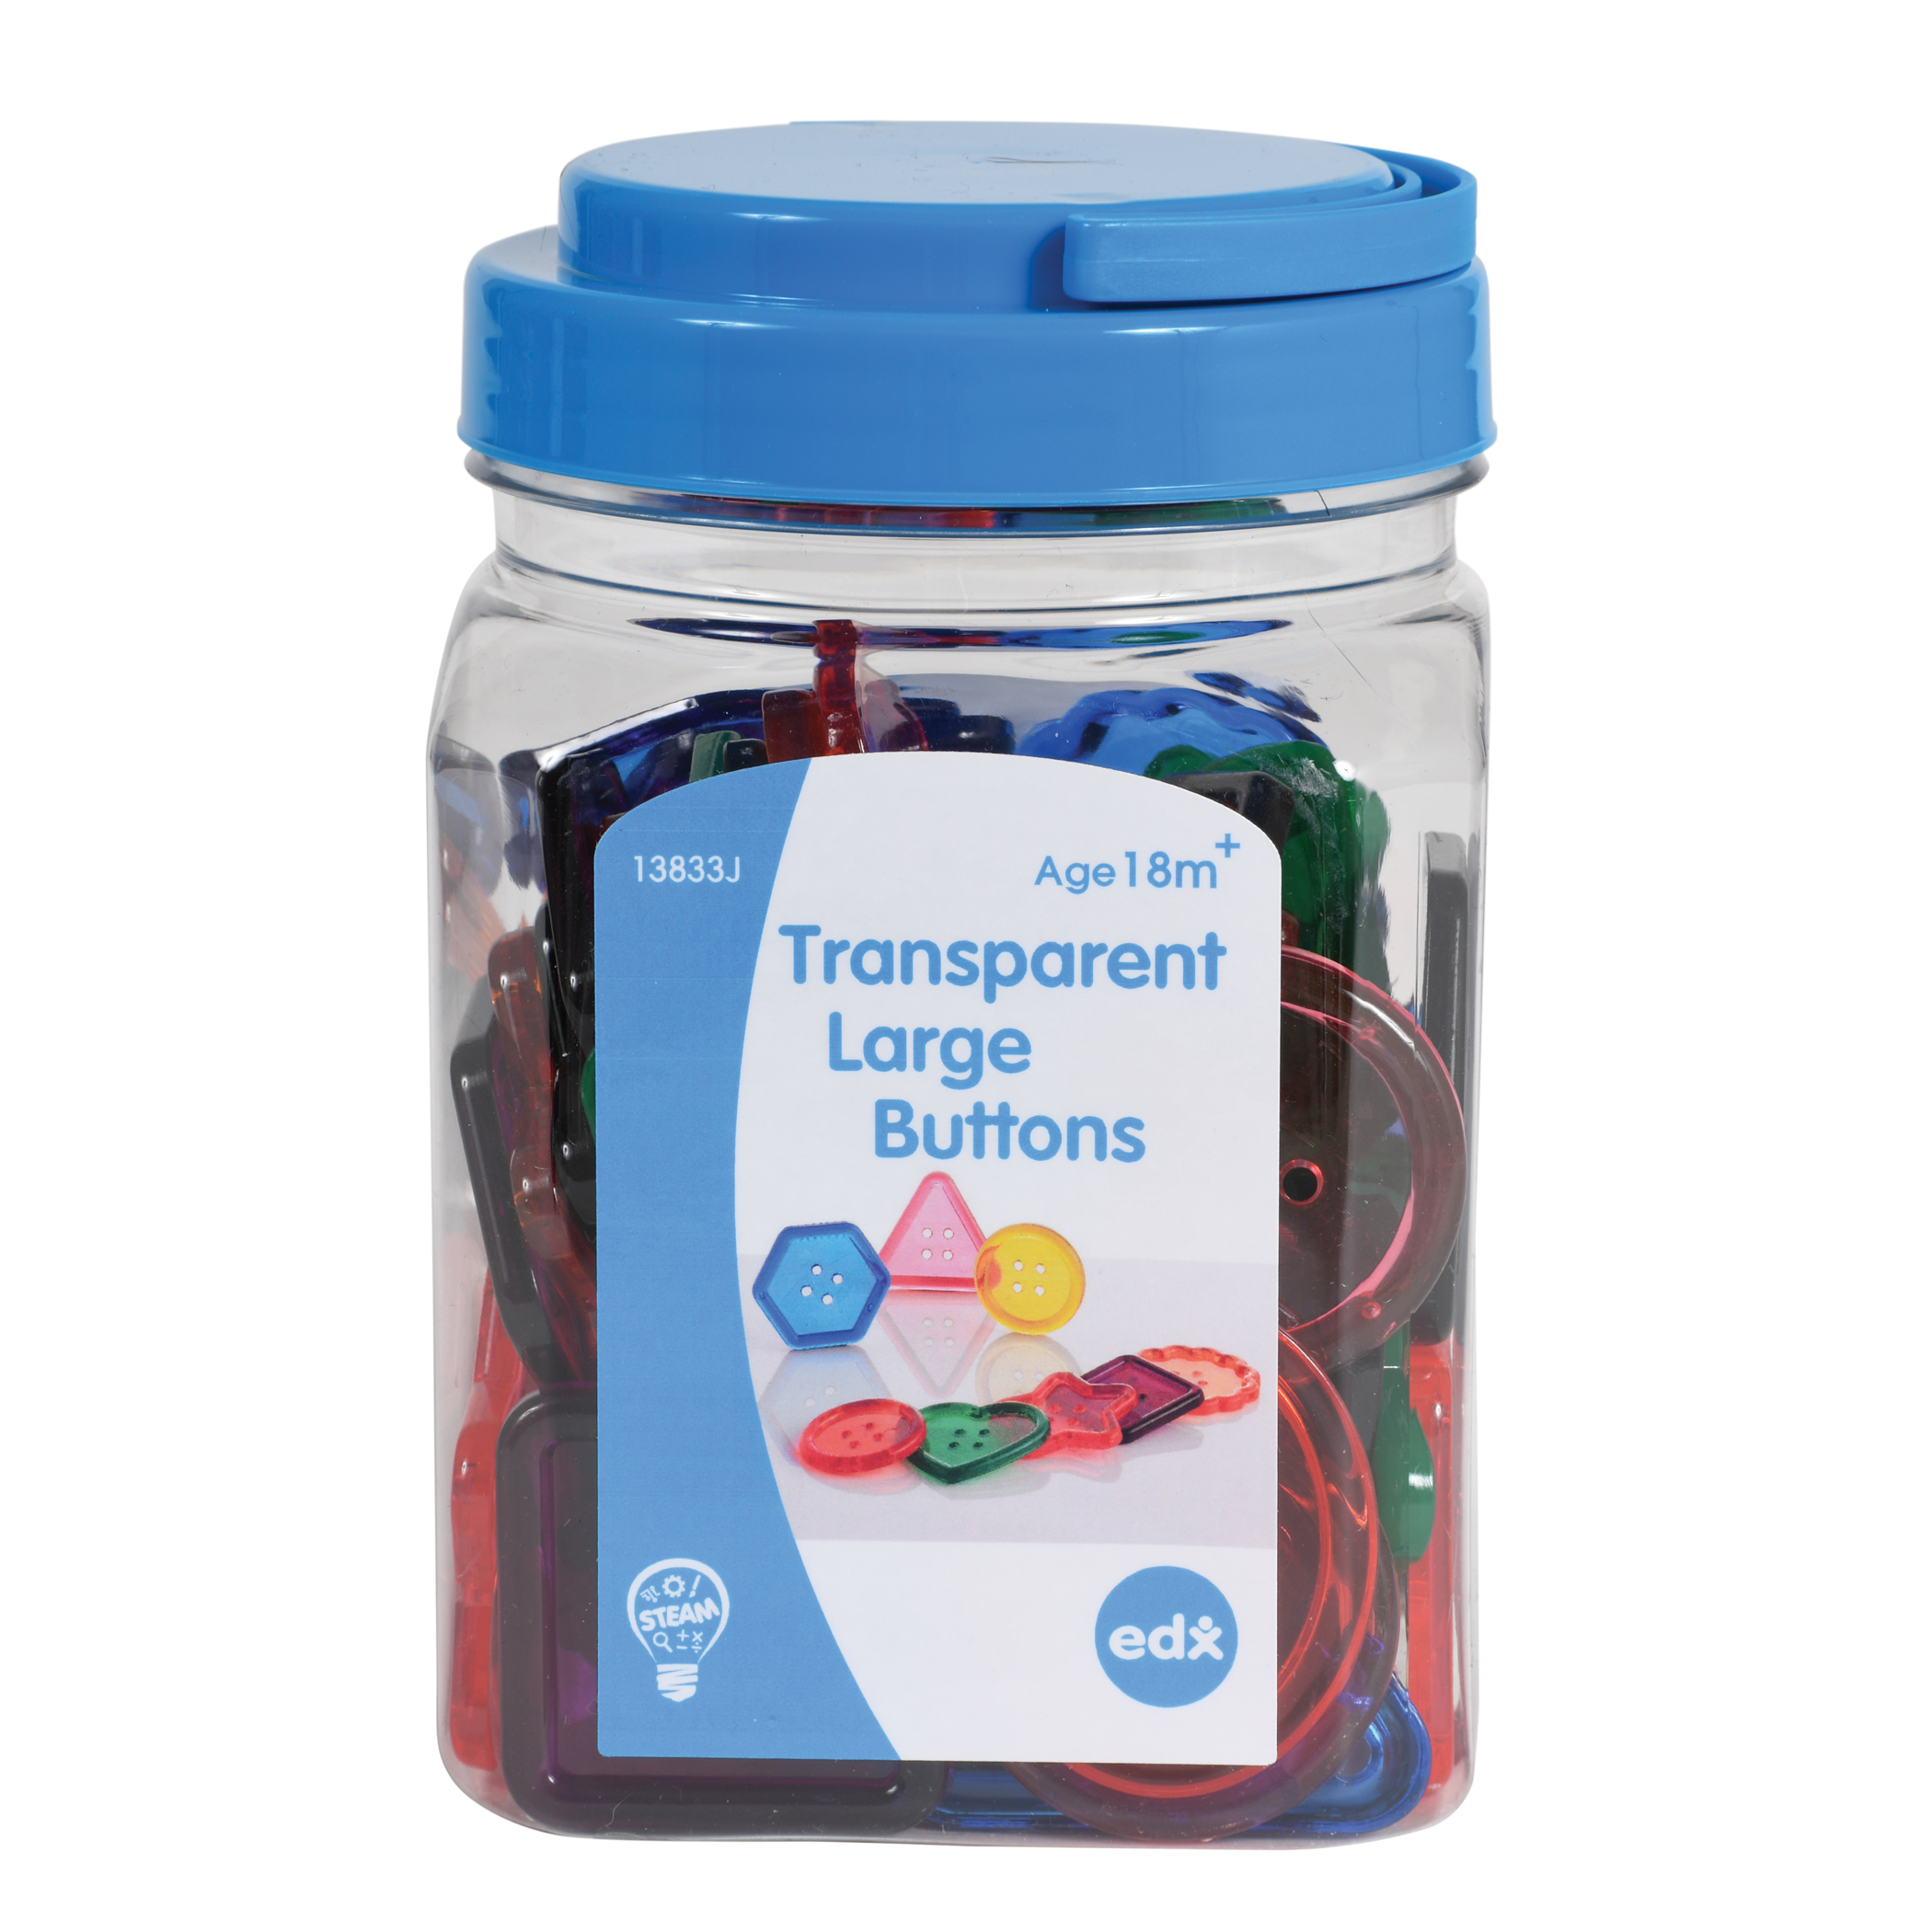 edxeducation Transparent Large Buttons - Mini Jar - 0.6 Pound image number null